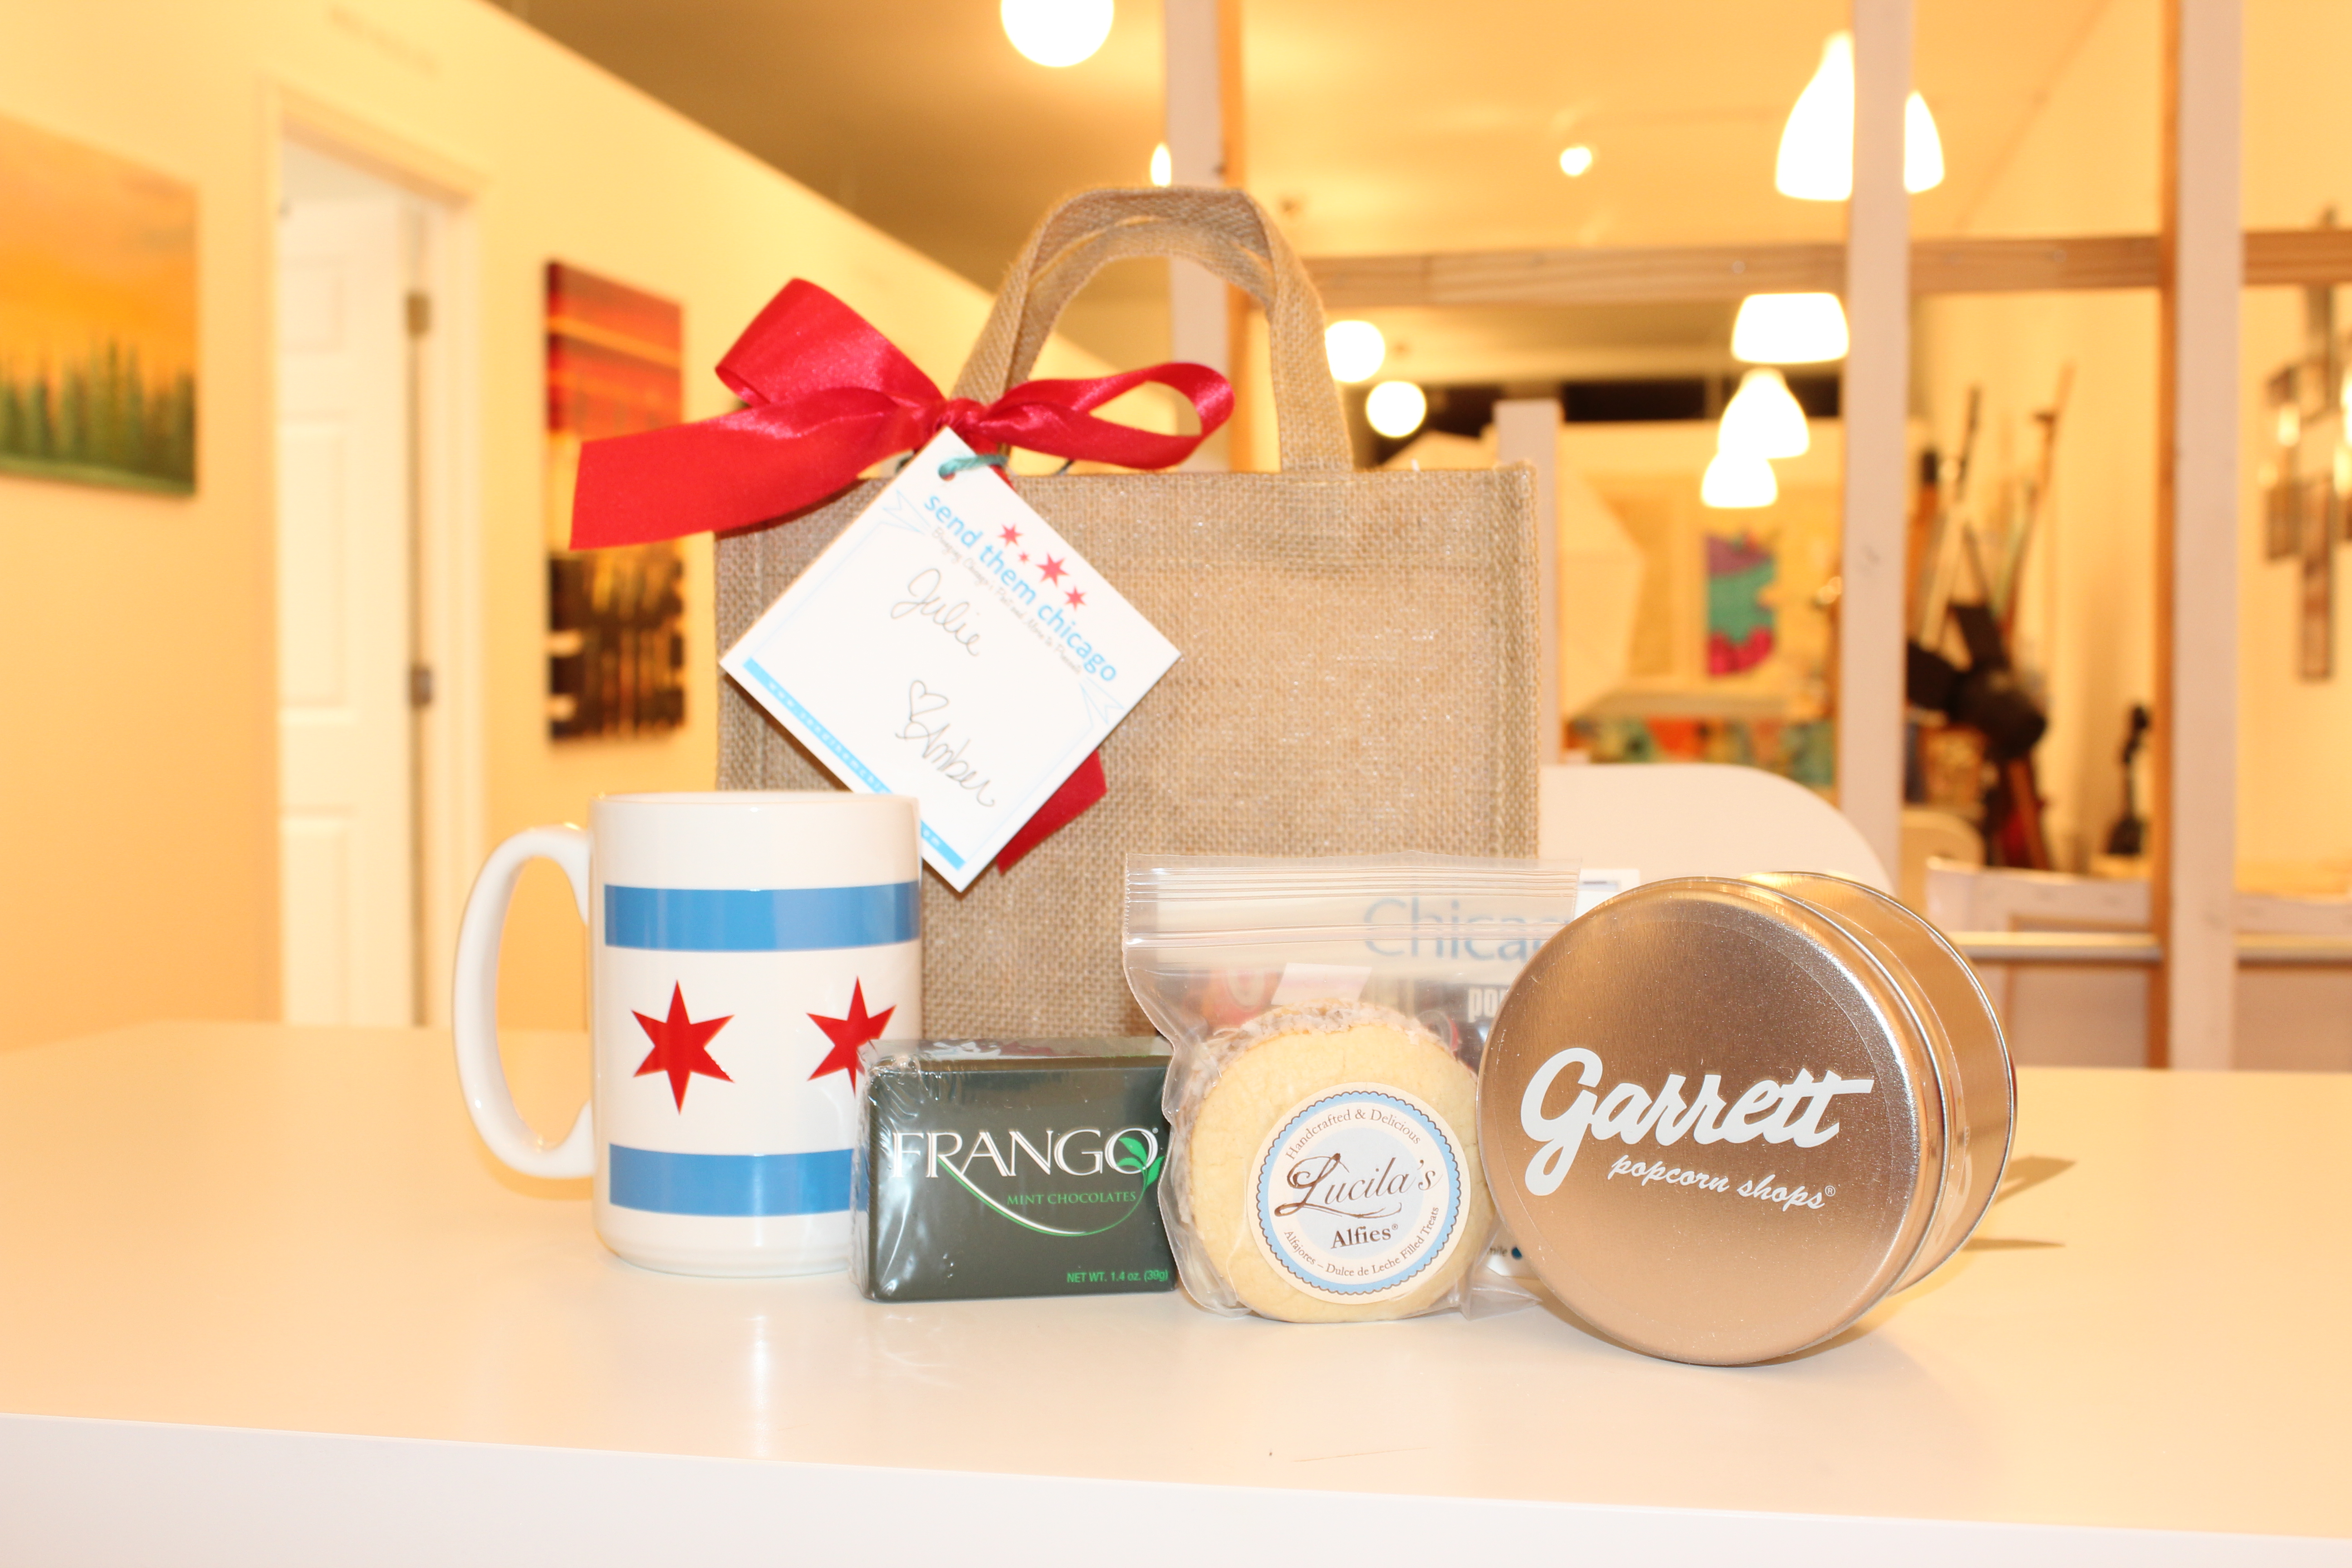 Send Them Chicago gift basket called "Windy City Welcome"